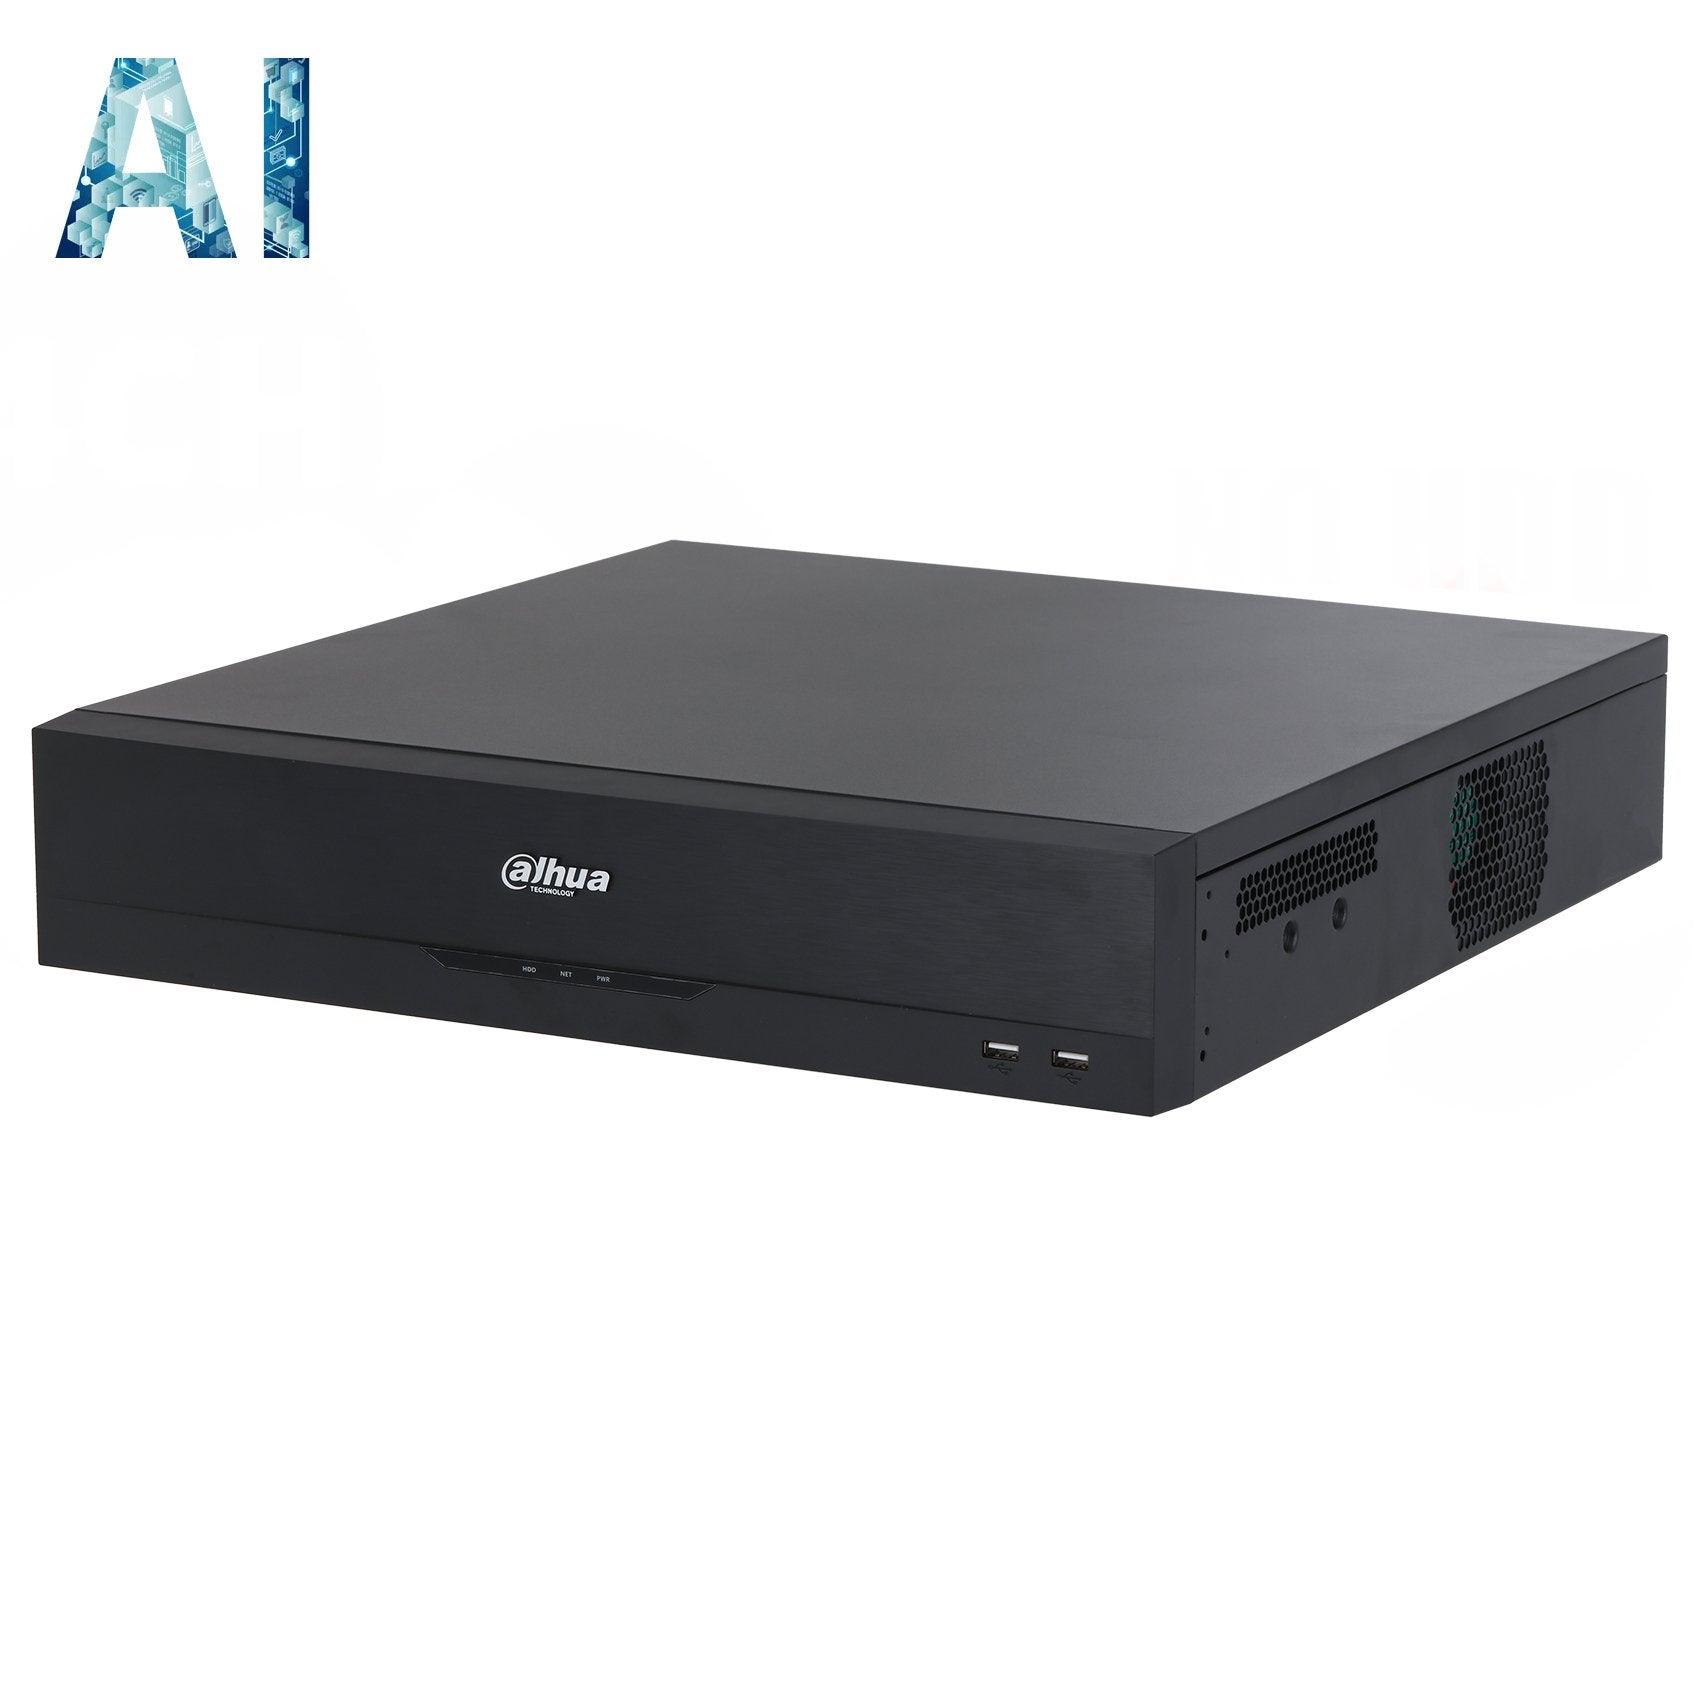 Dahua 64 Channel NVR, WizSense AI Series, 1.5RU, 384MB (200MB With AI Function Enabled), 2 x Gigabit NIC, 8 x HDD **NO POE PORTS OR HDD INSTALLED**